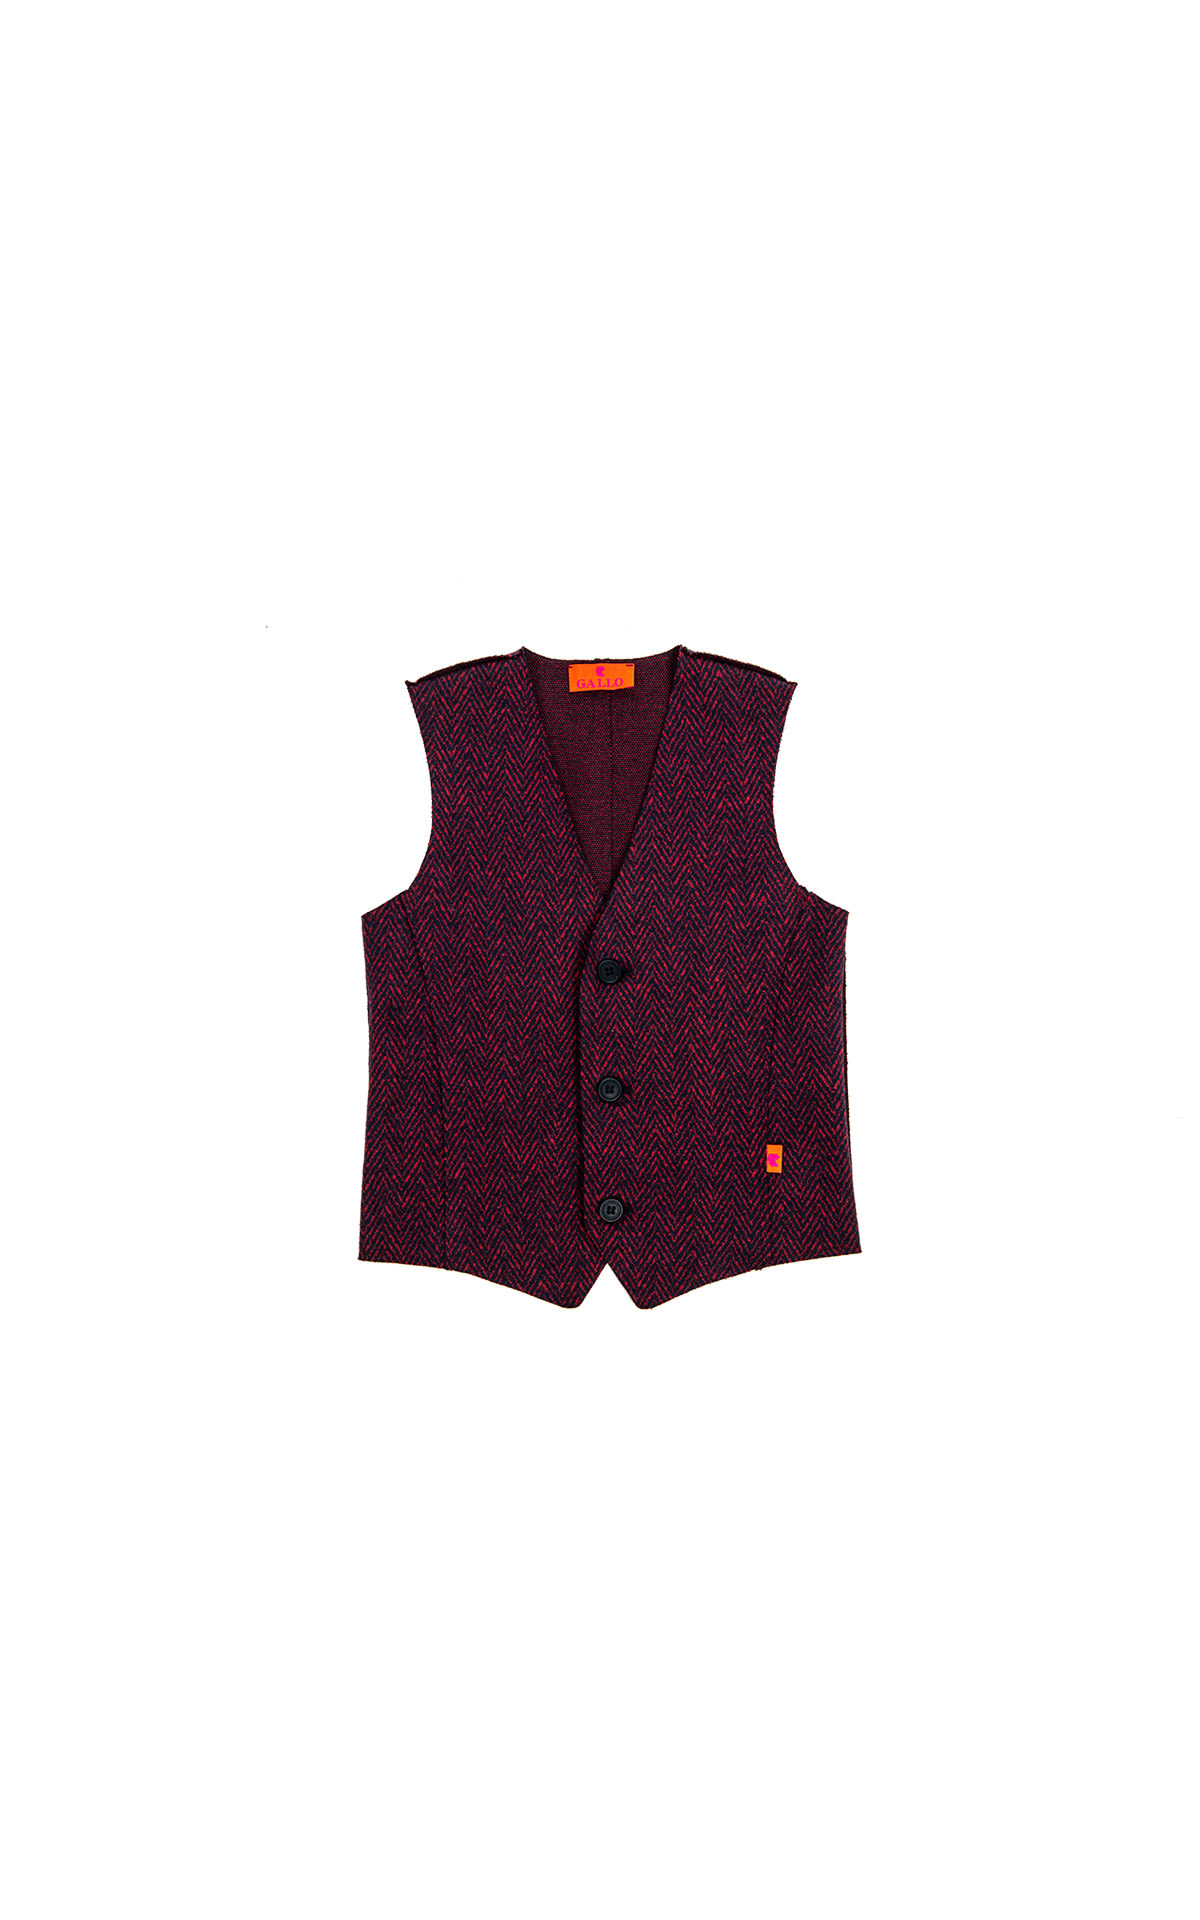 Gallo Royal polyester and cotton vest with herringbone pattern